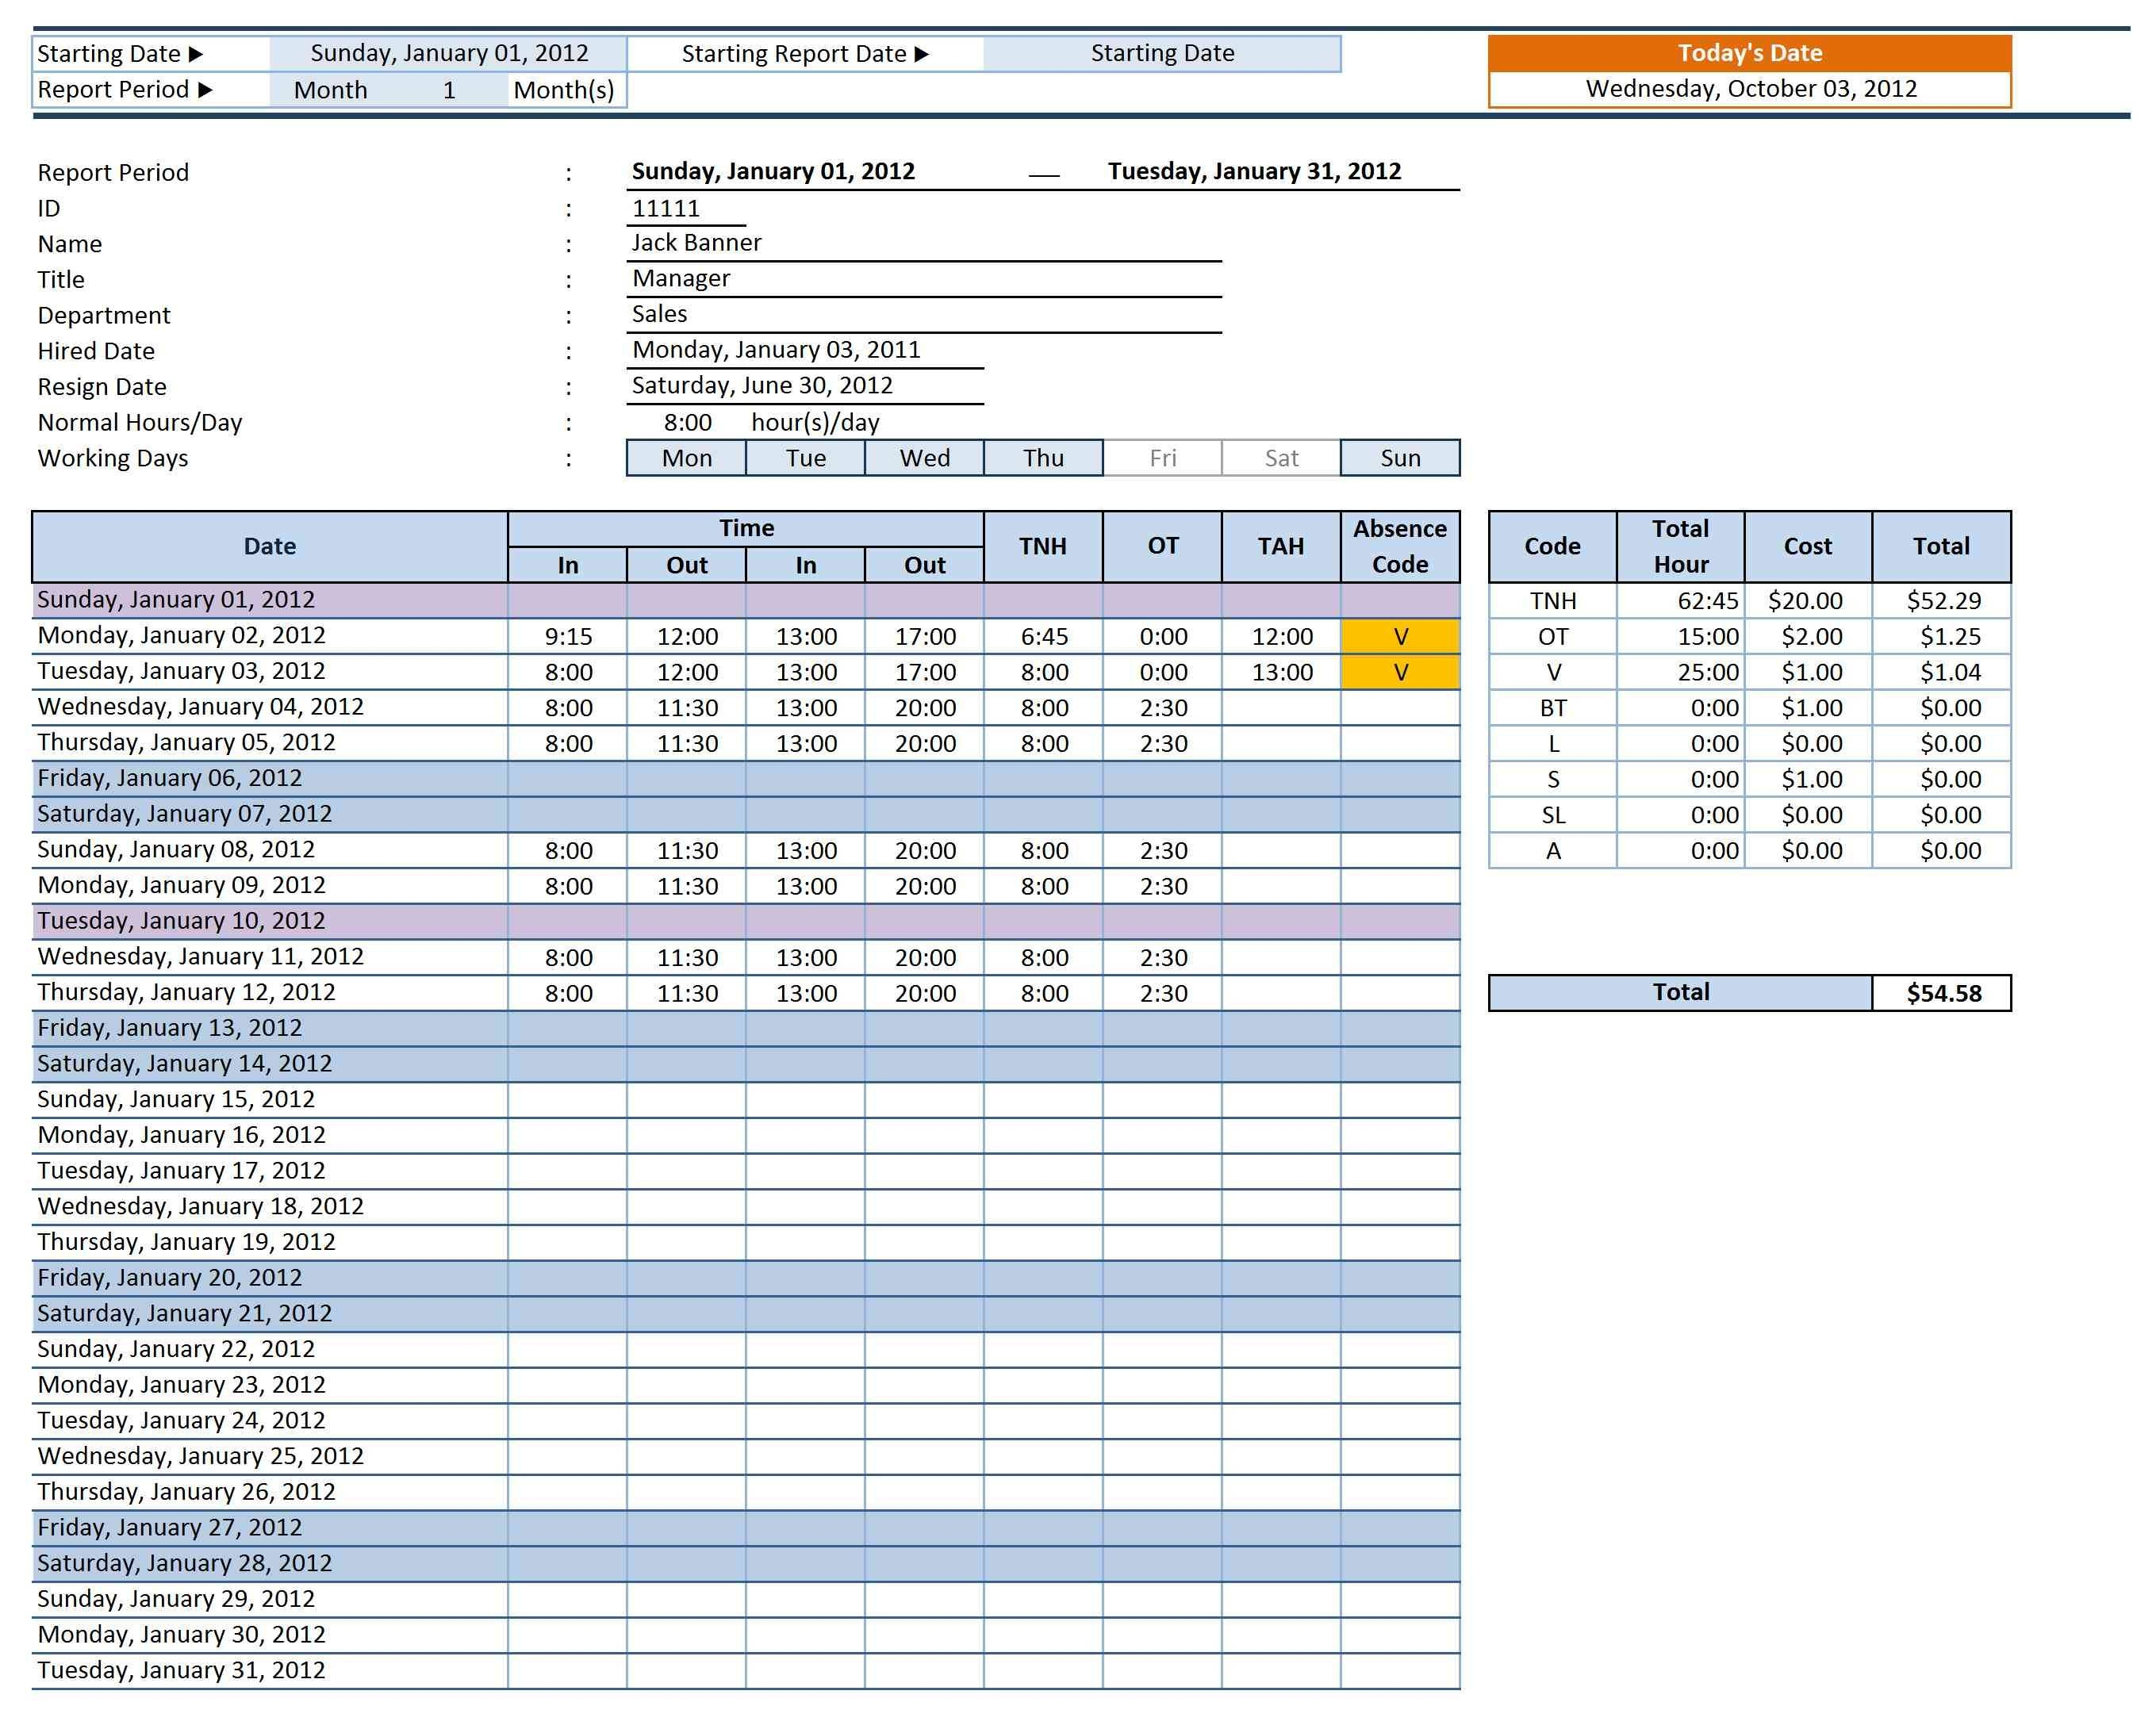 Fmla Tracking Spreadsheet Template Excel Inside Fmla Time Tracking Spreadsheet  Papillon Northwan For Fmla Tracking